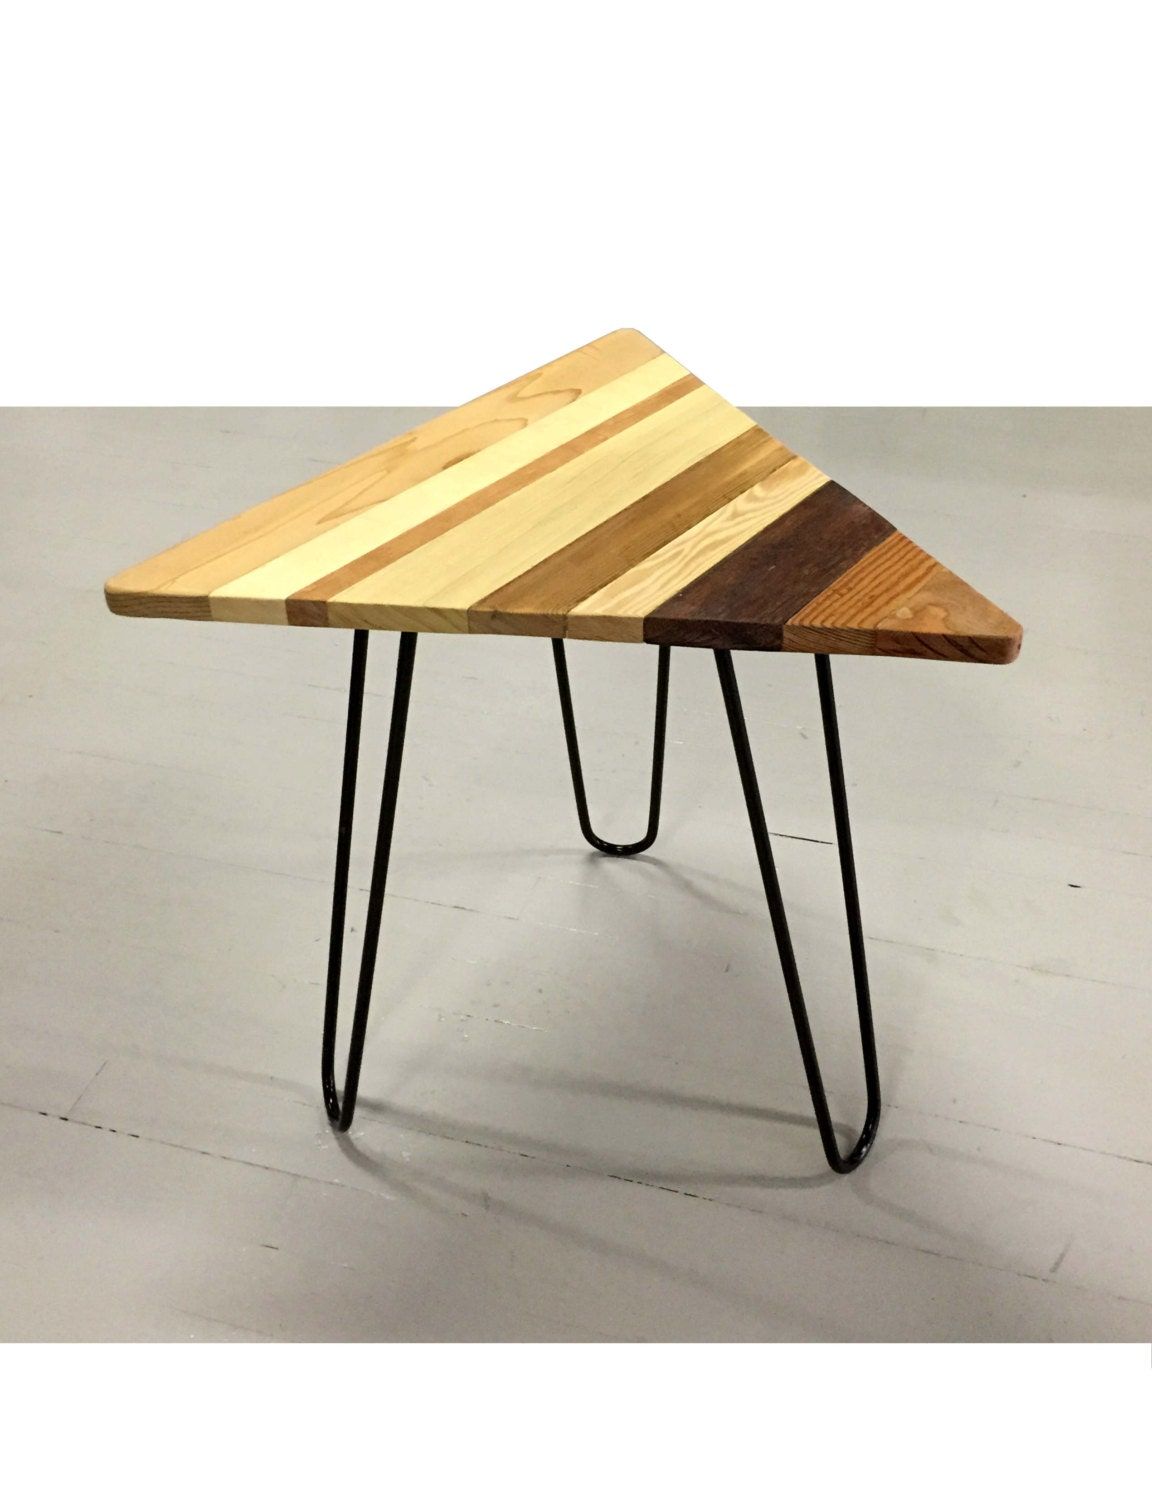 Reclaimed Wood Triangular Modern End Table Or Coffee Table Inside Triangular Coffee Tables (View 12 of 15)